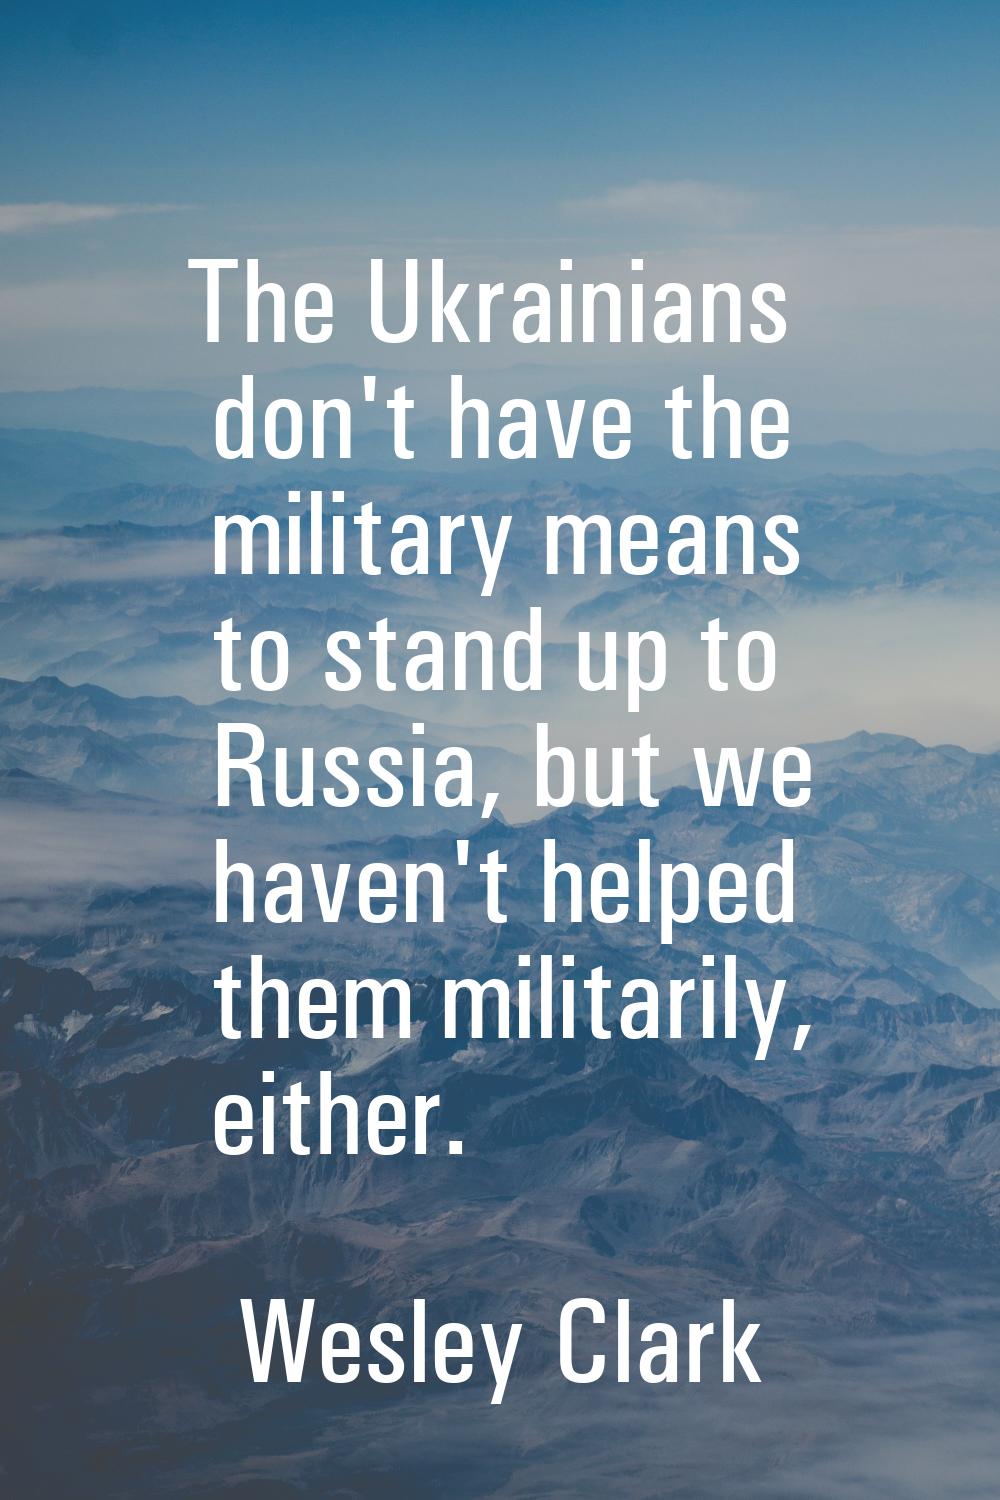 The Ukrainians don't have the military means to stand up to Russia, but we haven't helped them mili